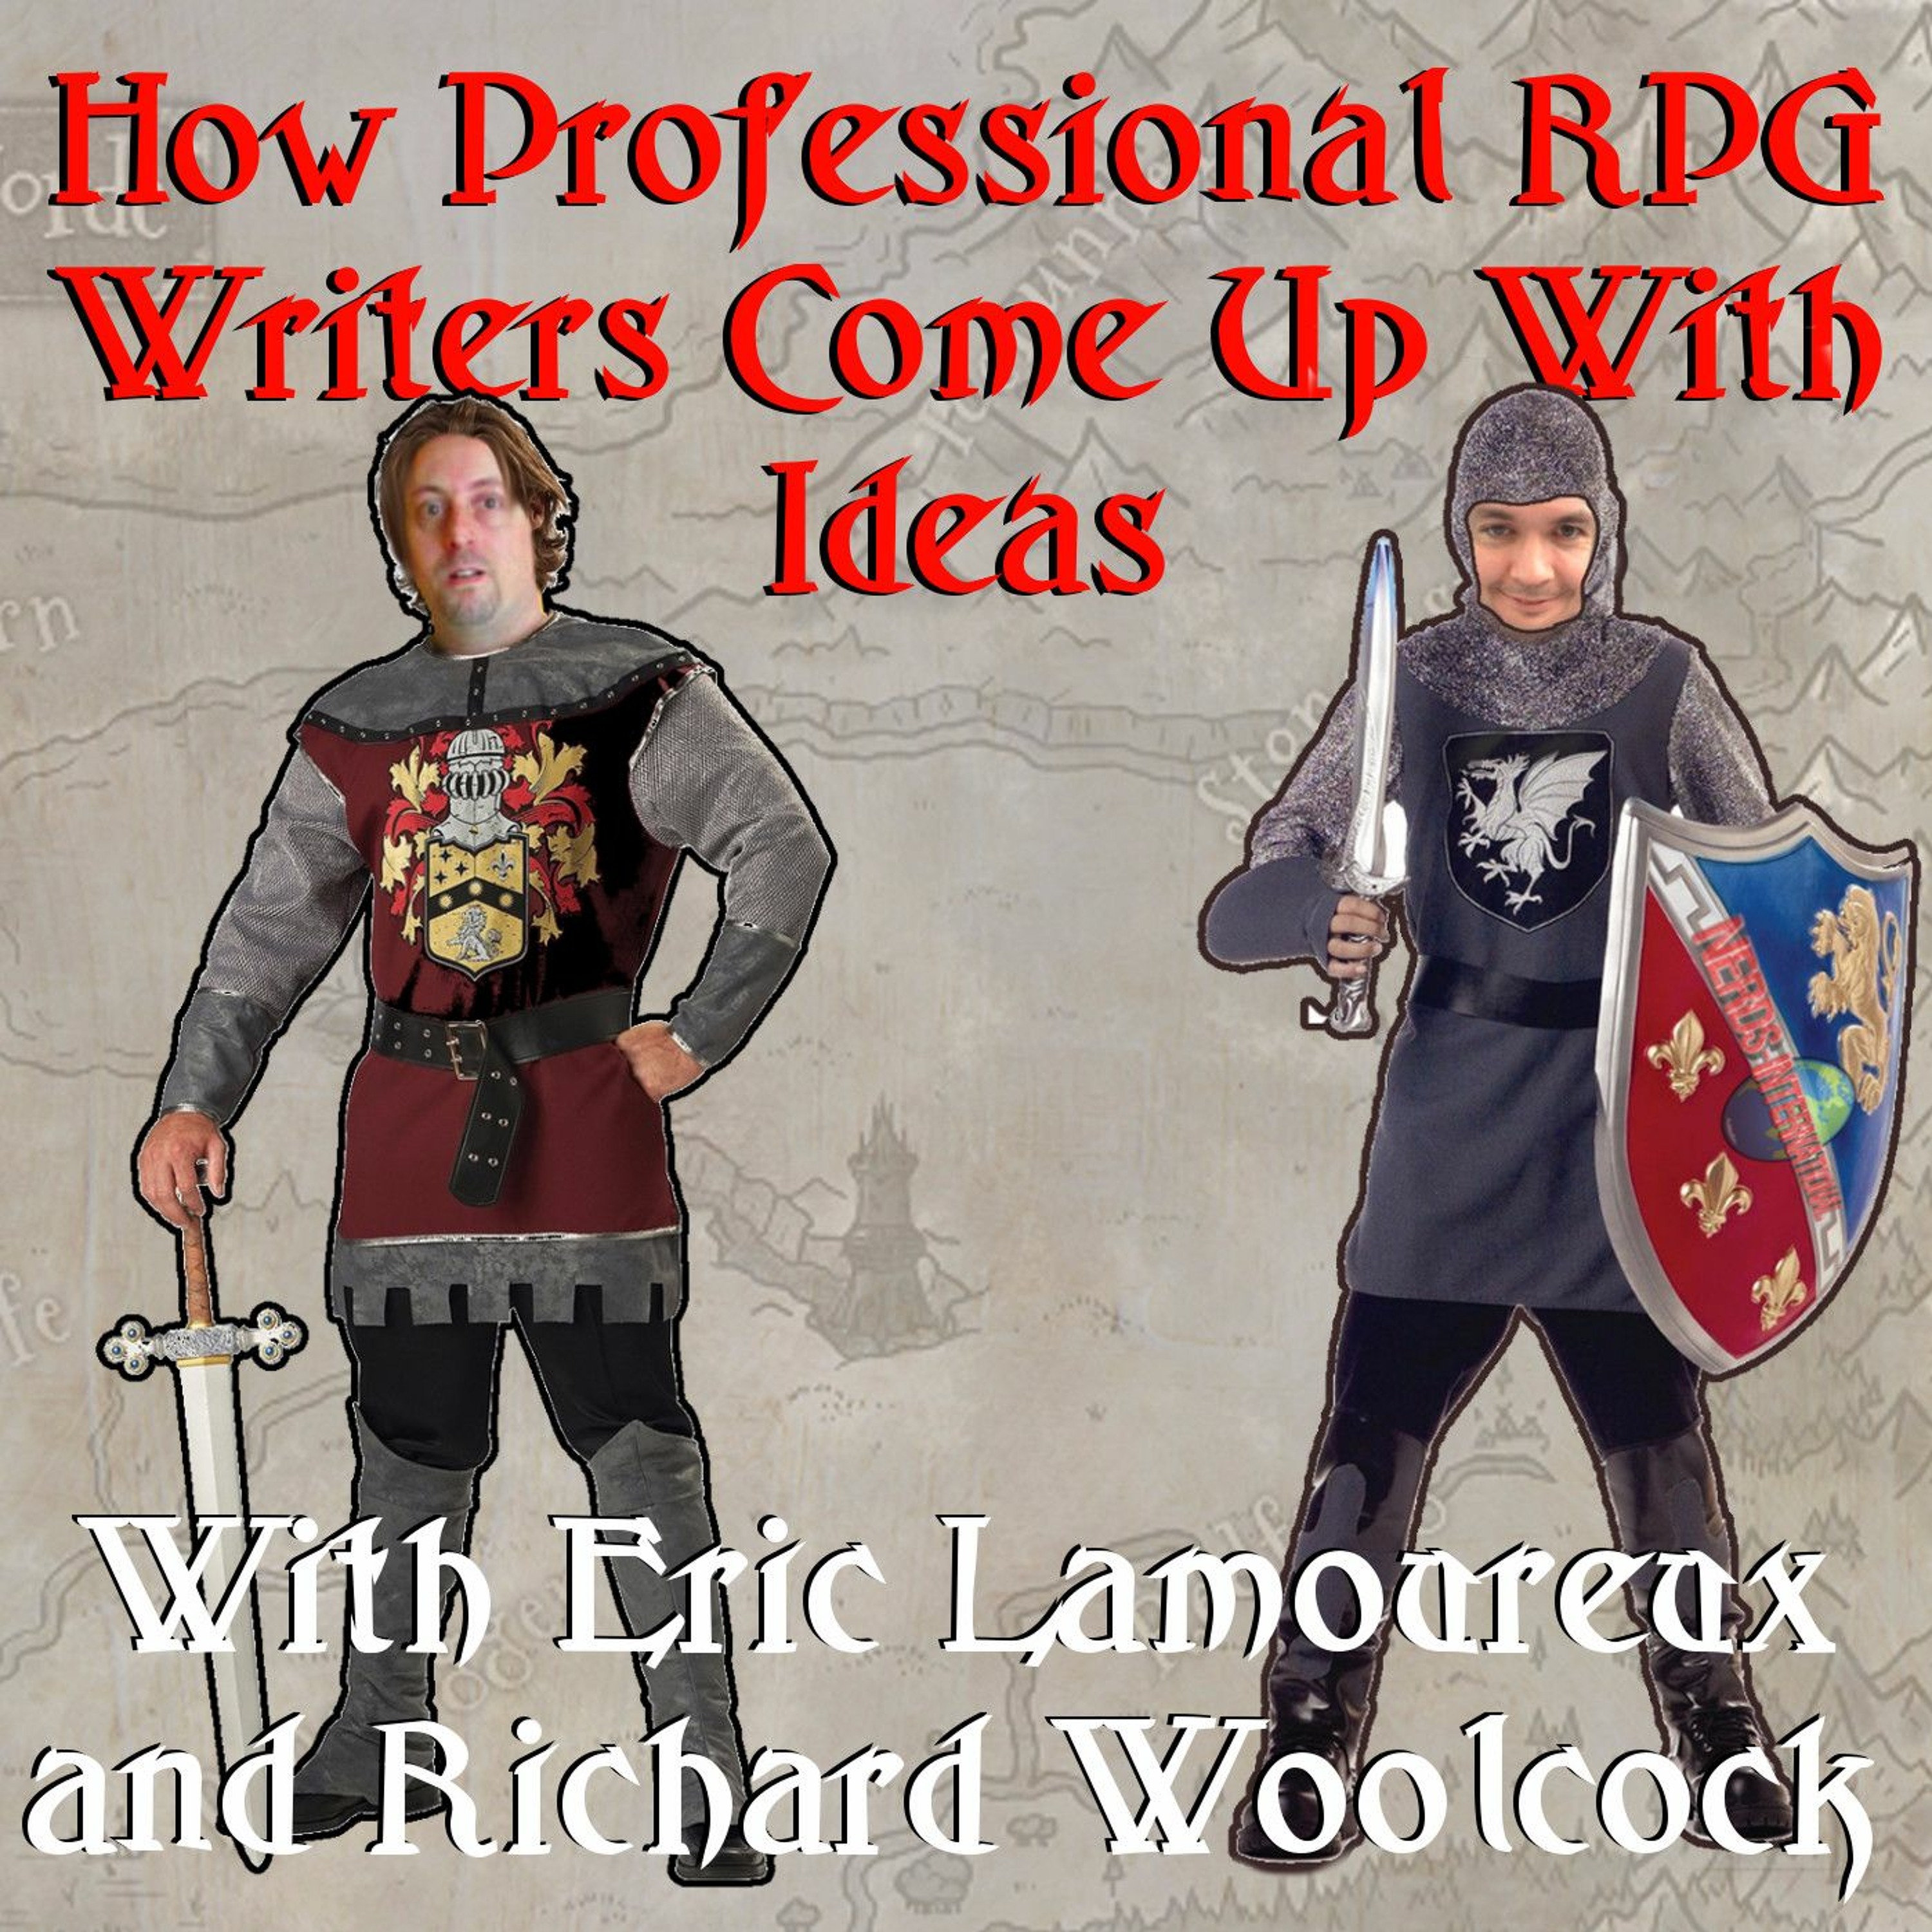 Bonus Content - How Professional RPG writers get ideas. With Eric Lamoureux and Richard Woolcock.